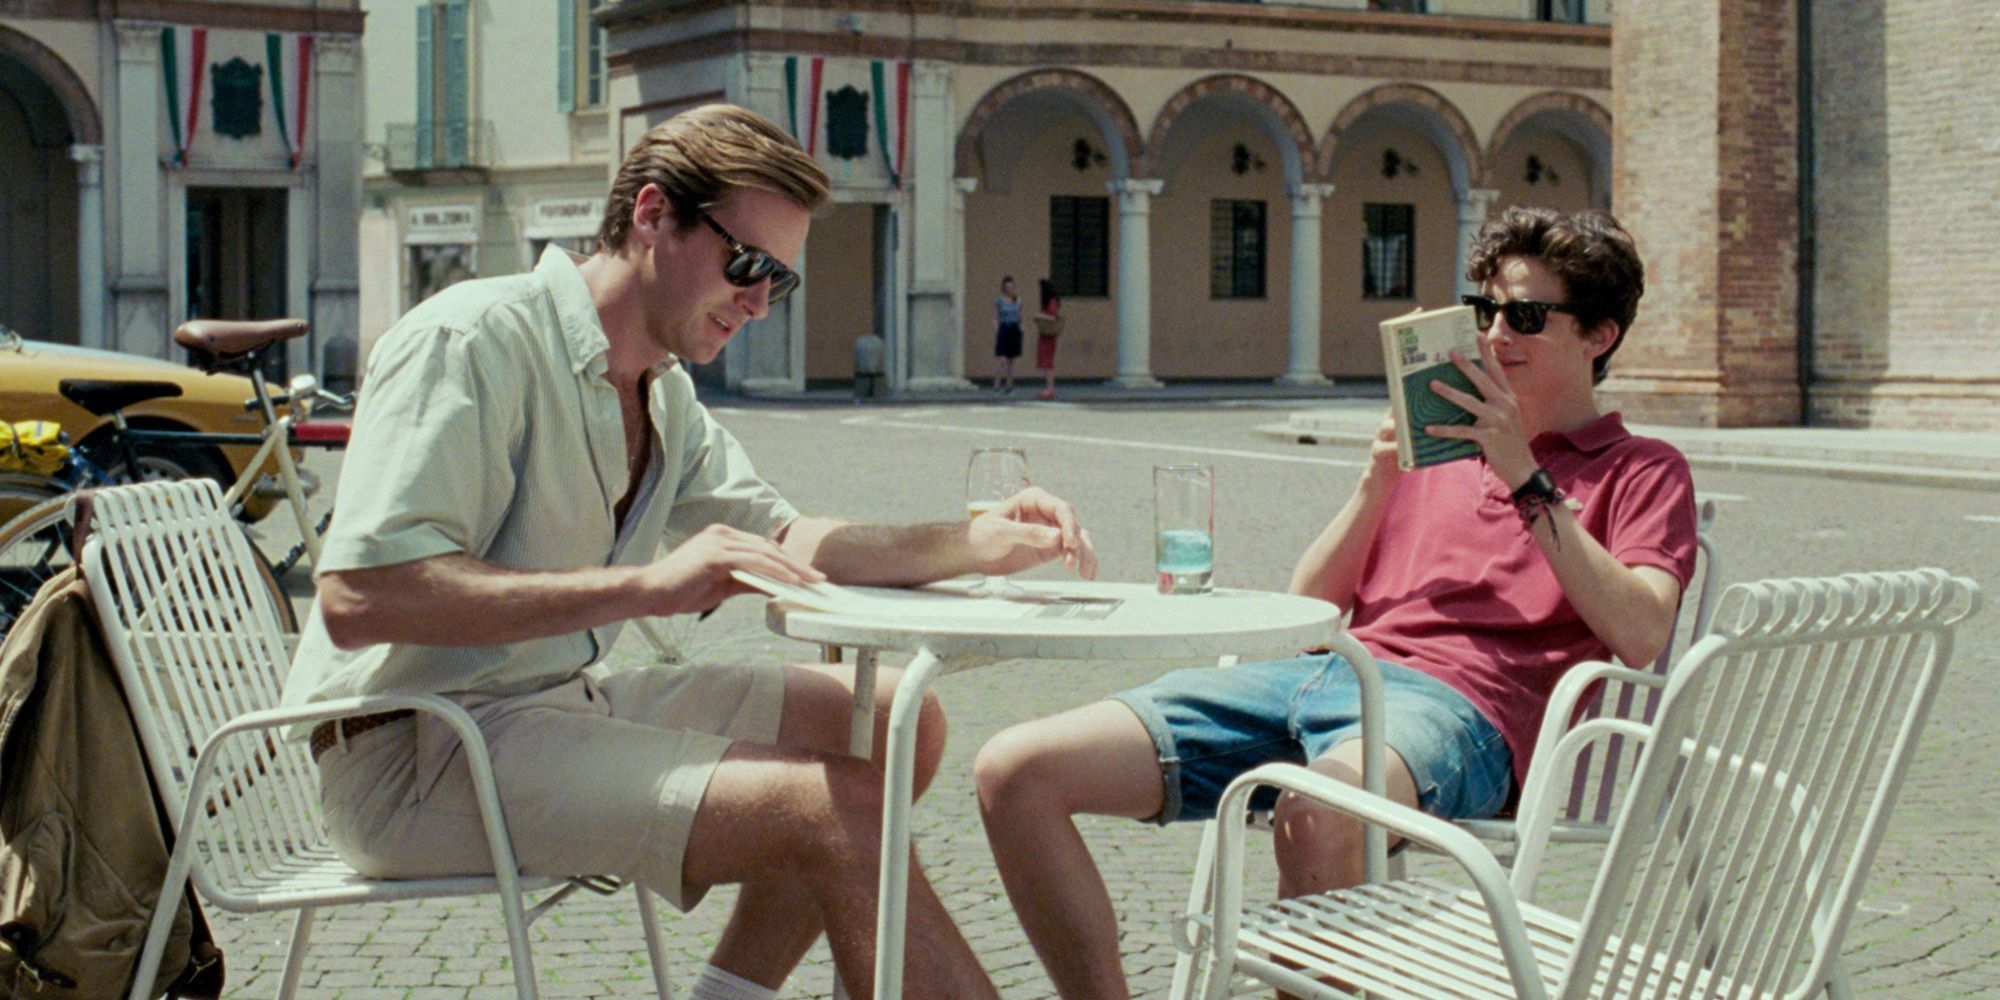 Hammer and Chalamet in Call Me By Your Name sitting at cafe chairs outside